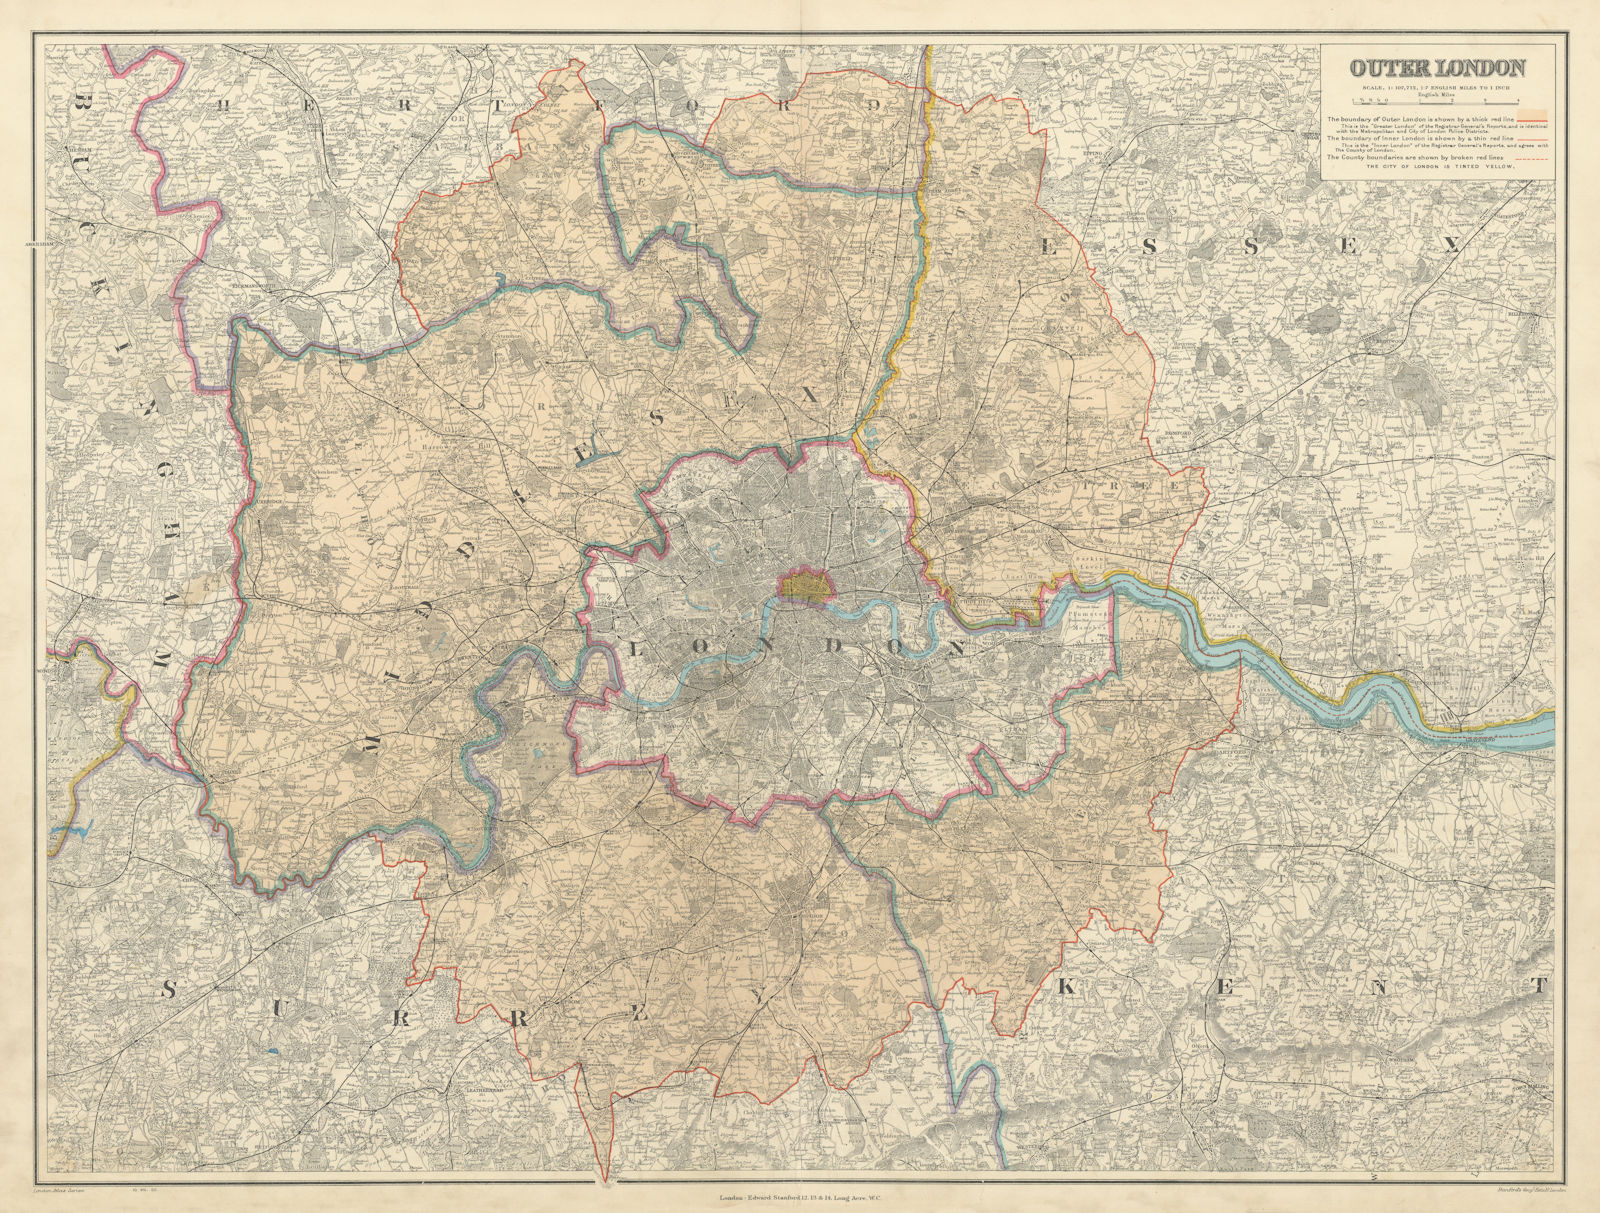 Outer [Greater] London. Metropolitan Police Area. 54x72cm. STANFORD 1904 map